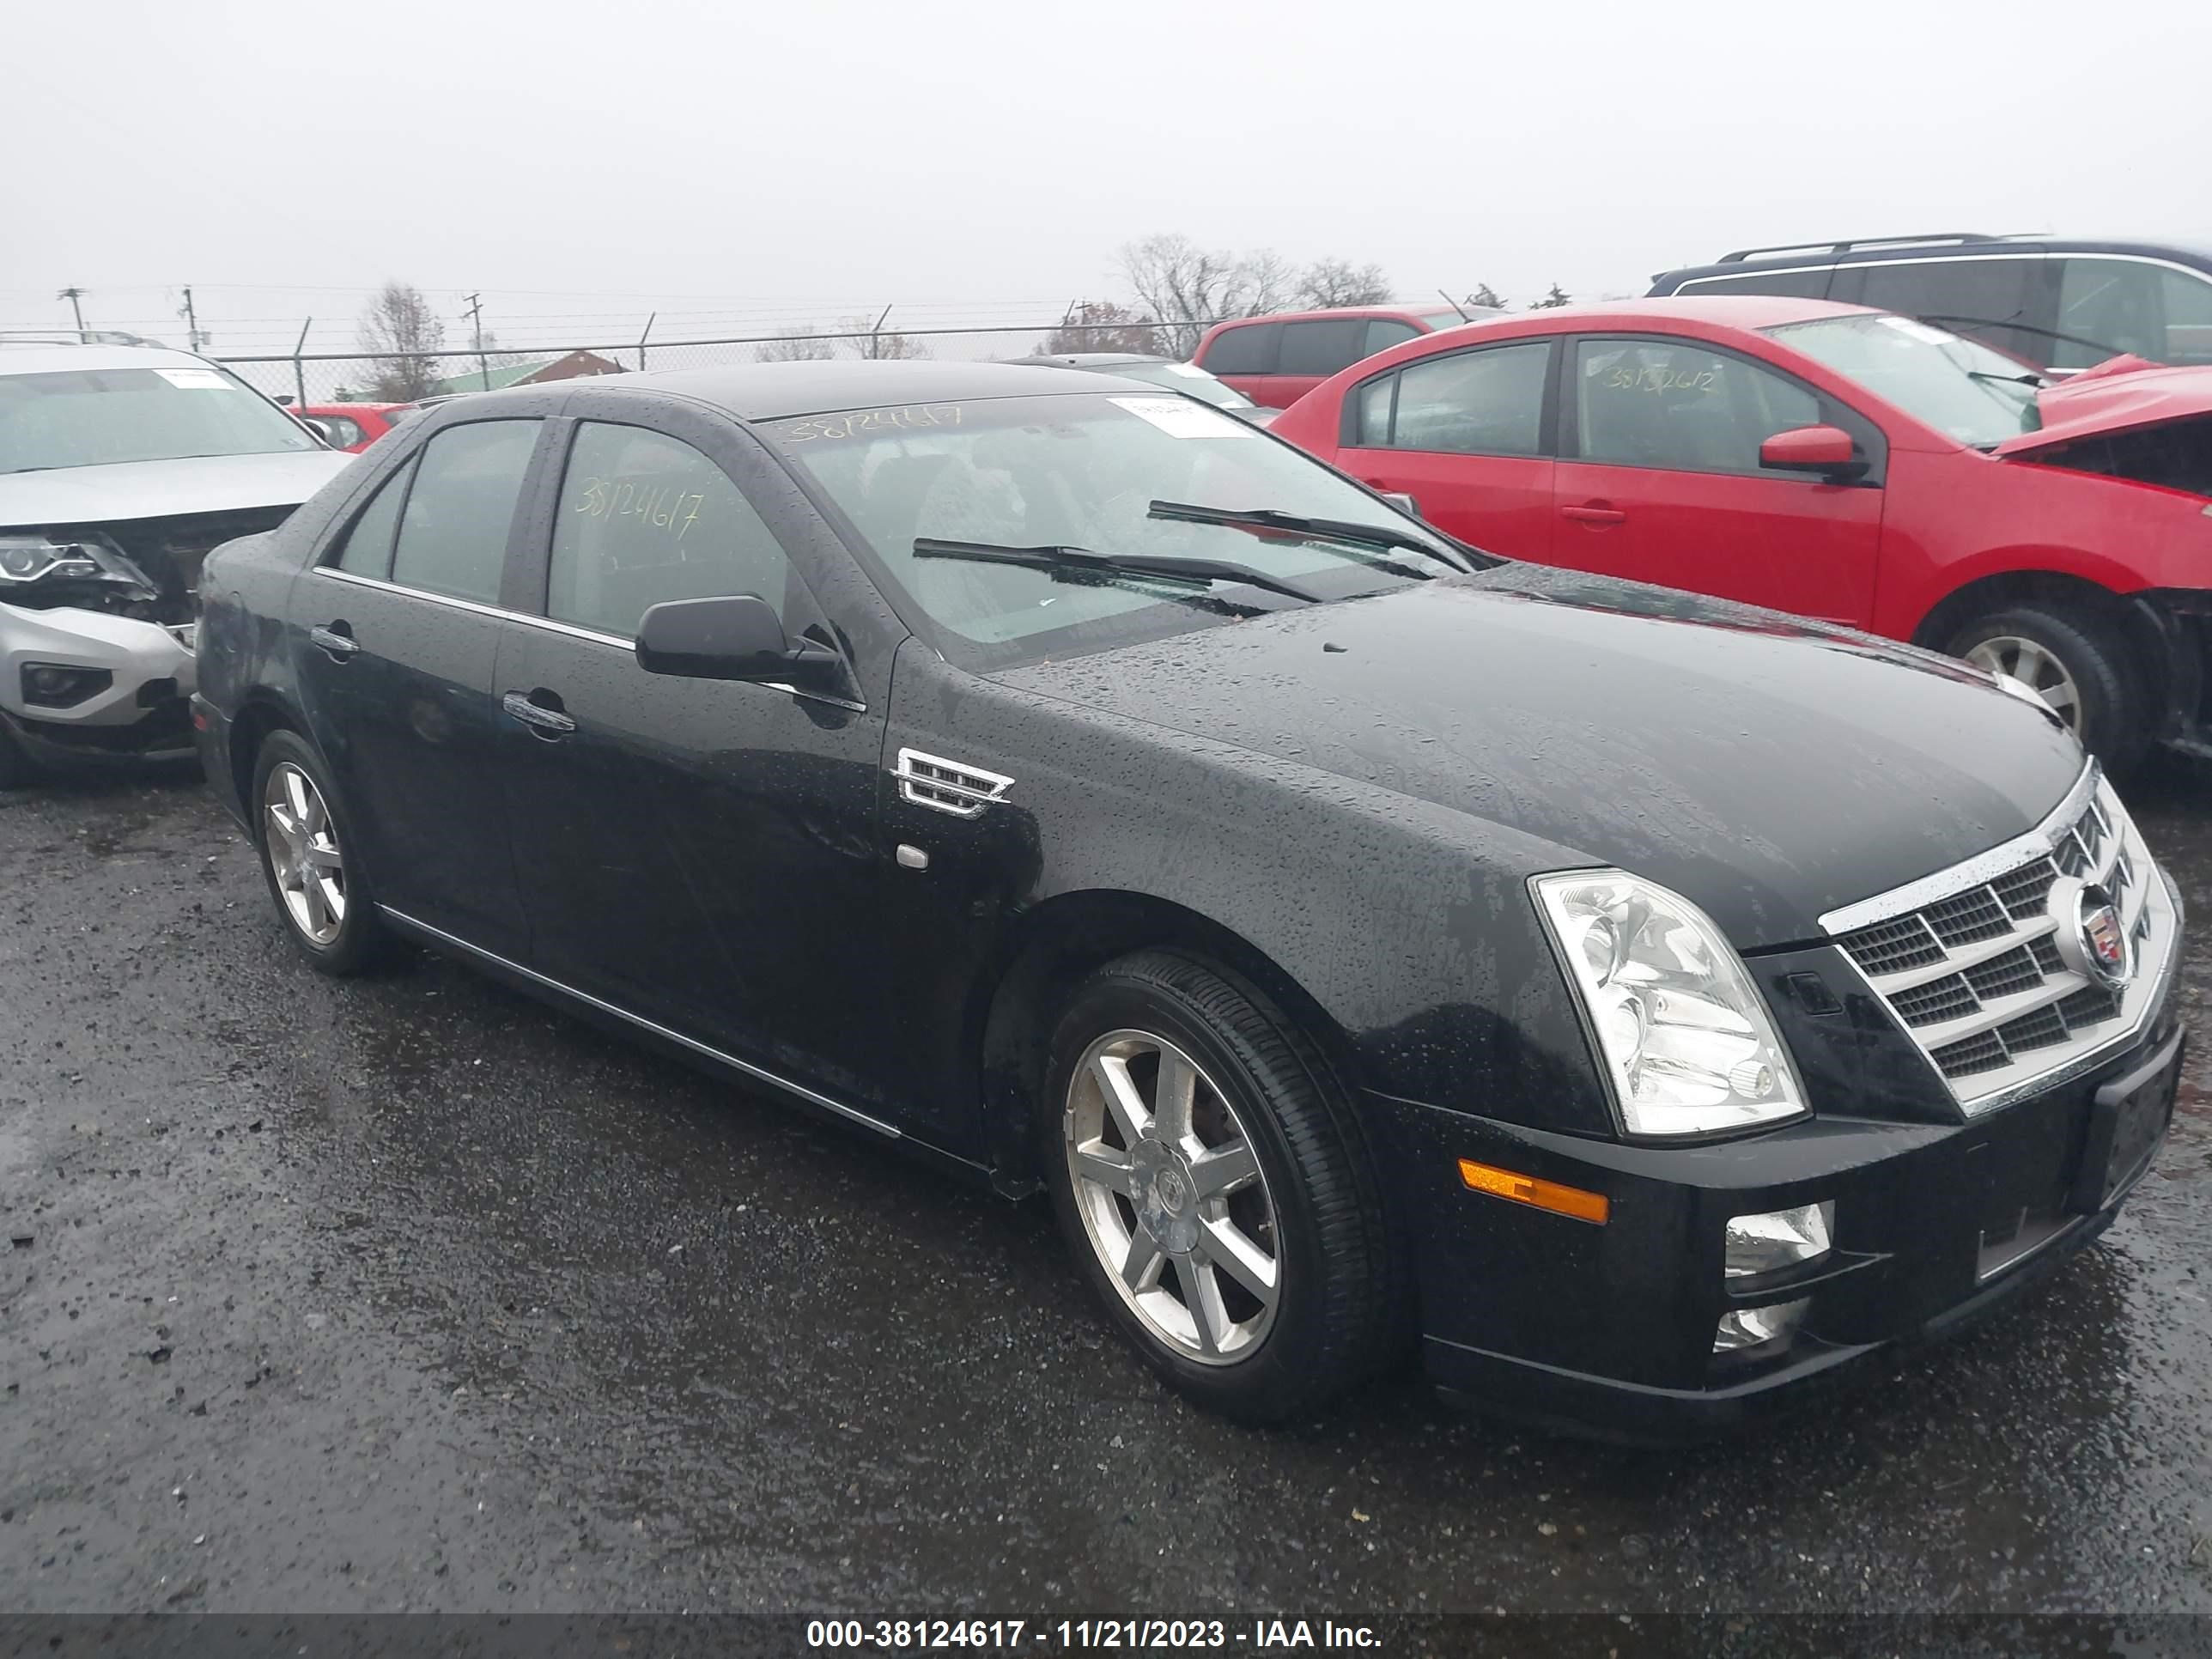 vin: 1G6DD67V880189716 1G6DD67V880189716 2008 cadillac sts 3600 for Sale in 22701, 15201 Review Rd, Culpeper, USA